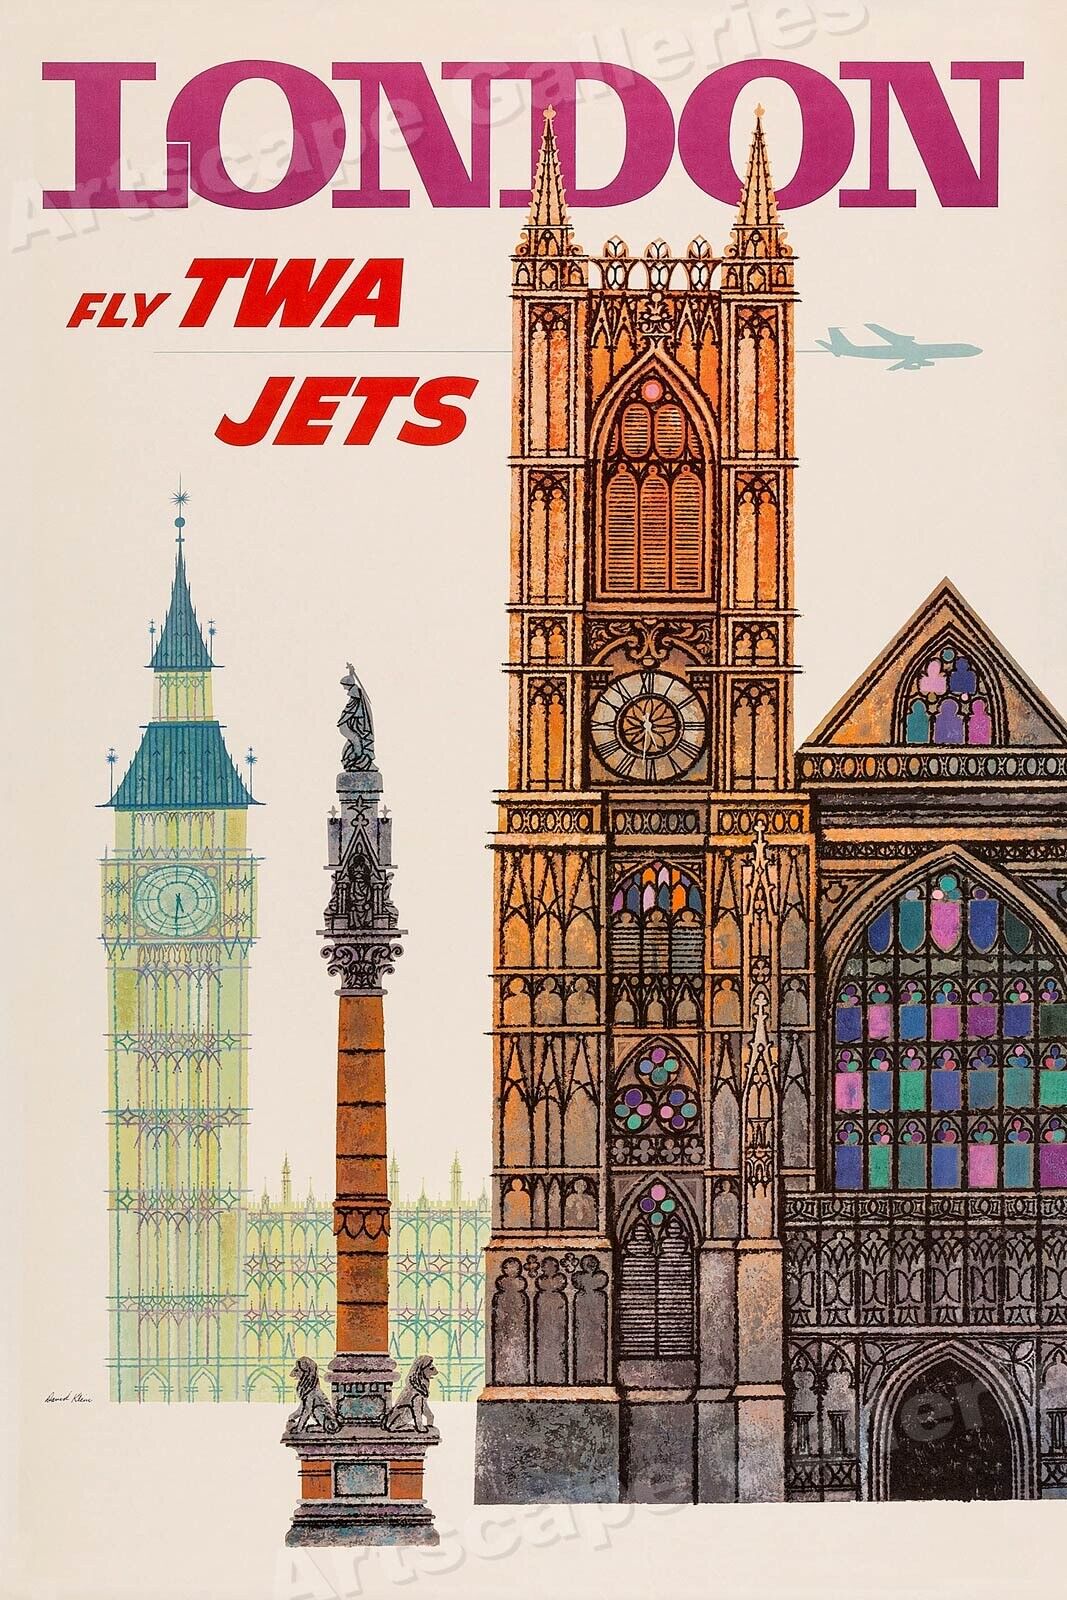 1960 London Fly TWA Jets Vintage Style Travel Poster - 20x30